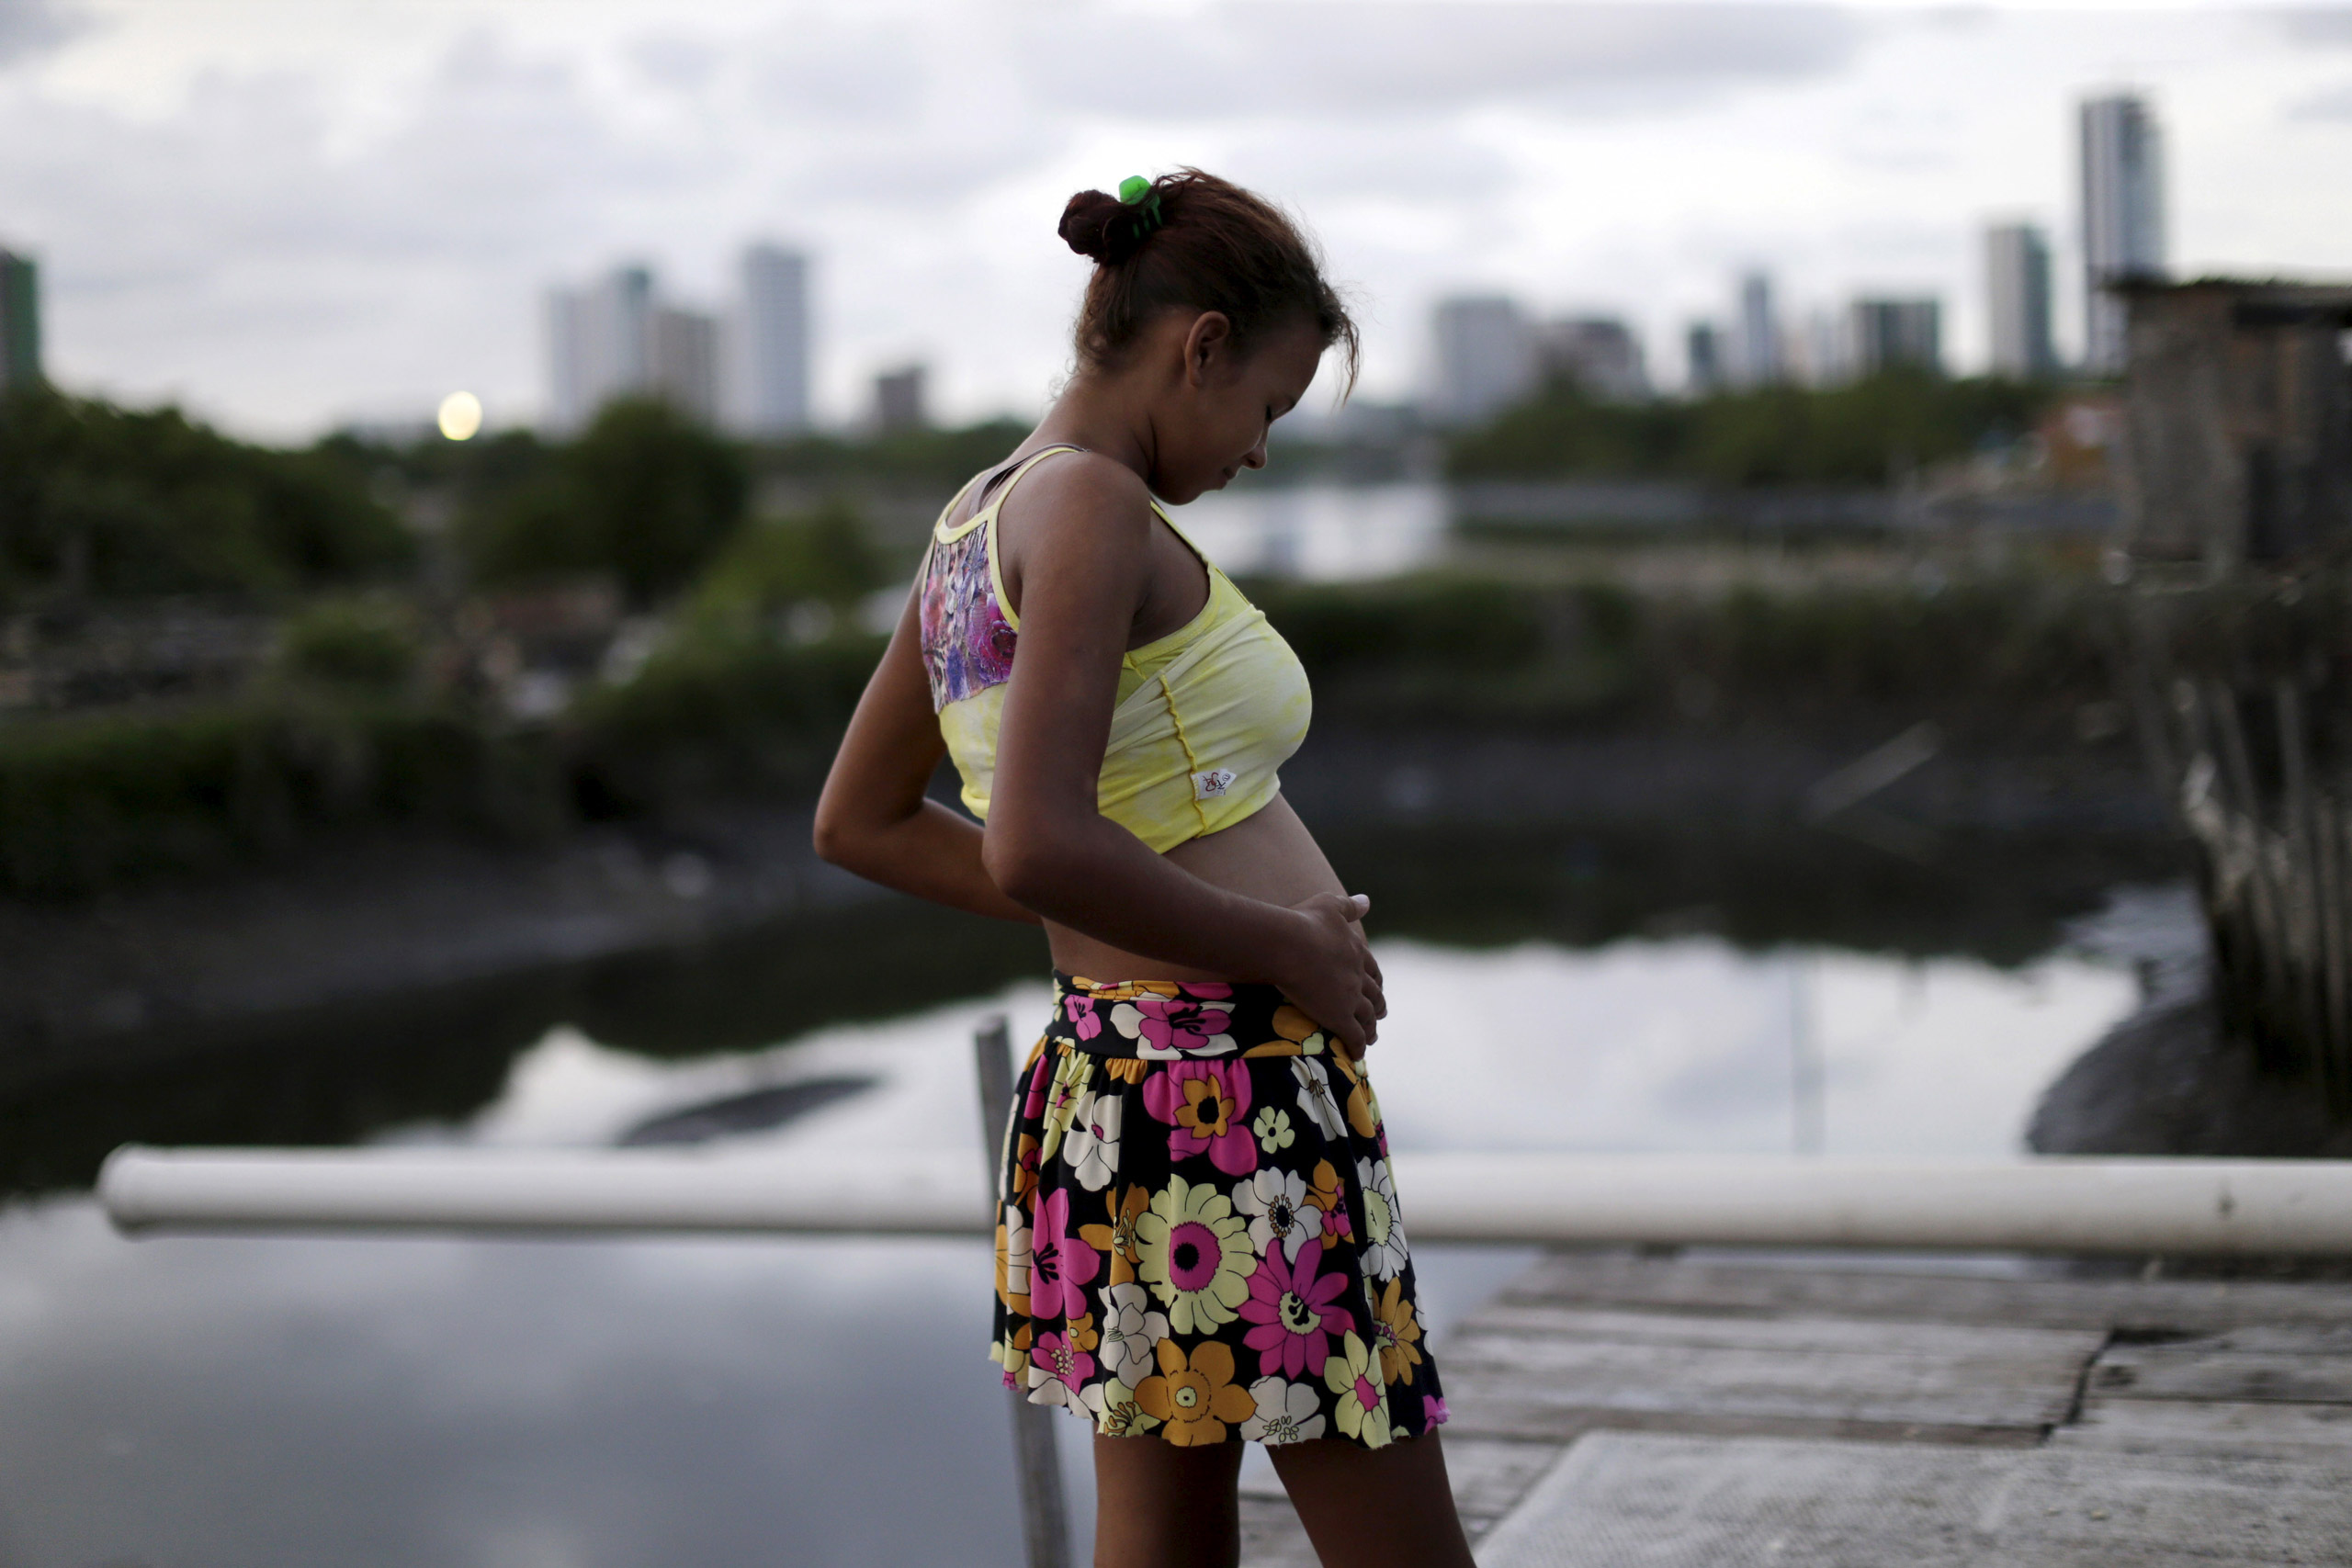 Eritania Maria, who is six months pregnant, is seen in front of her house at a slum in Recife, Brazil, on Feb. 2, 2016. (Ueslei Marcelino—Reuters)